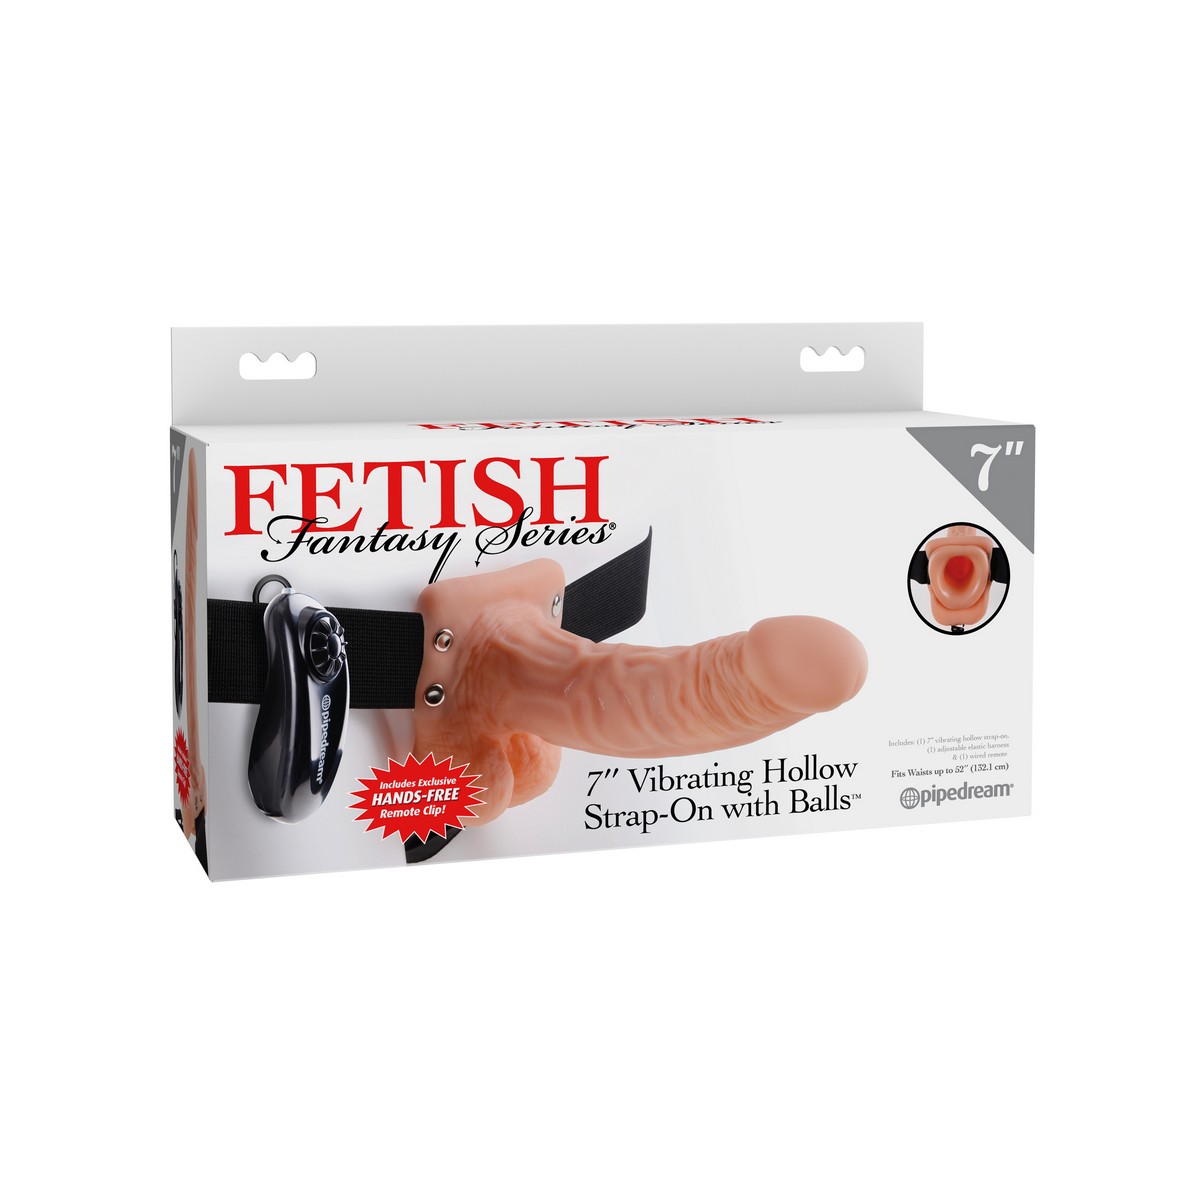       Fetish Fantasy Series 7 Vibrating Hollow Strap-On with Balls